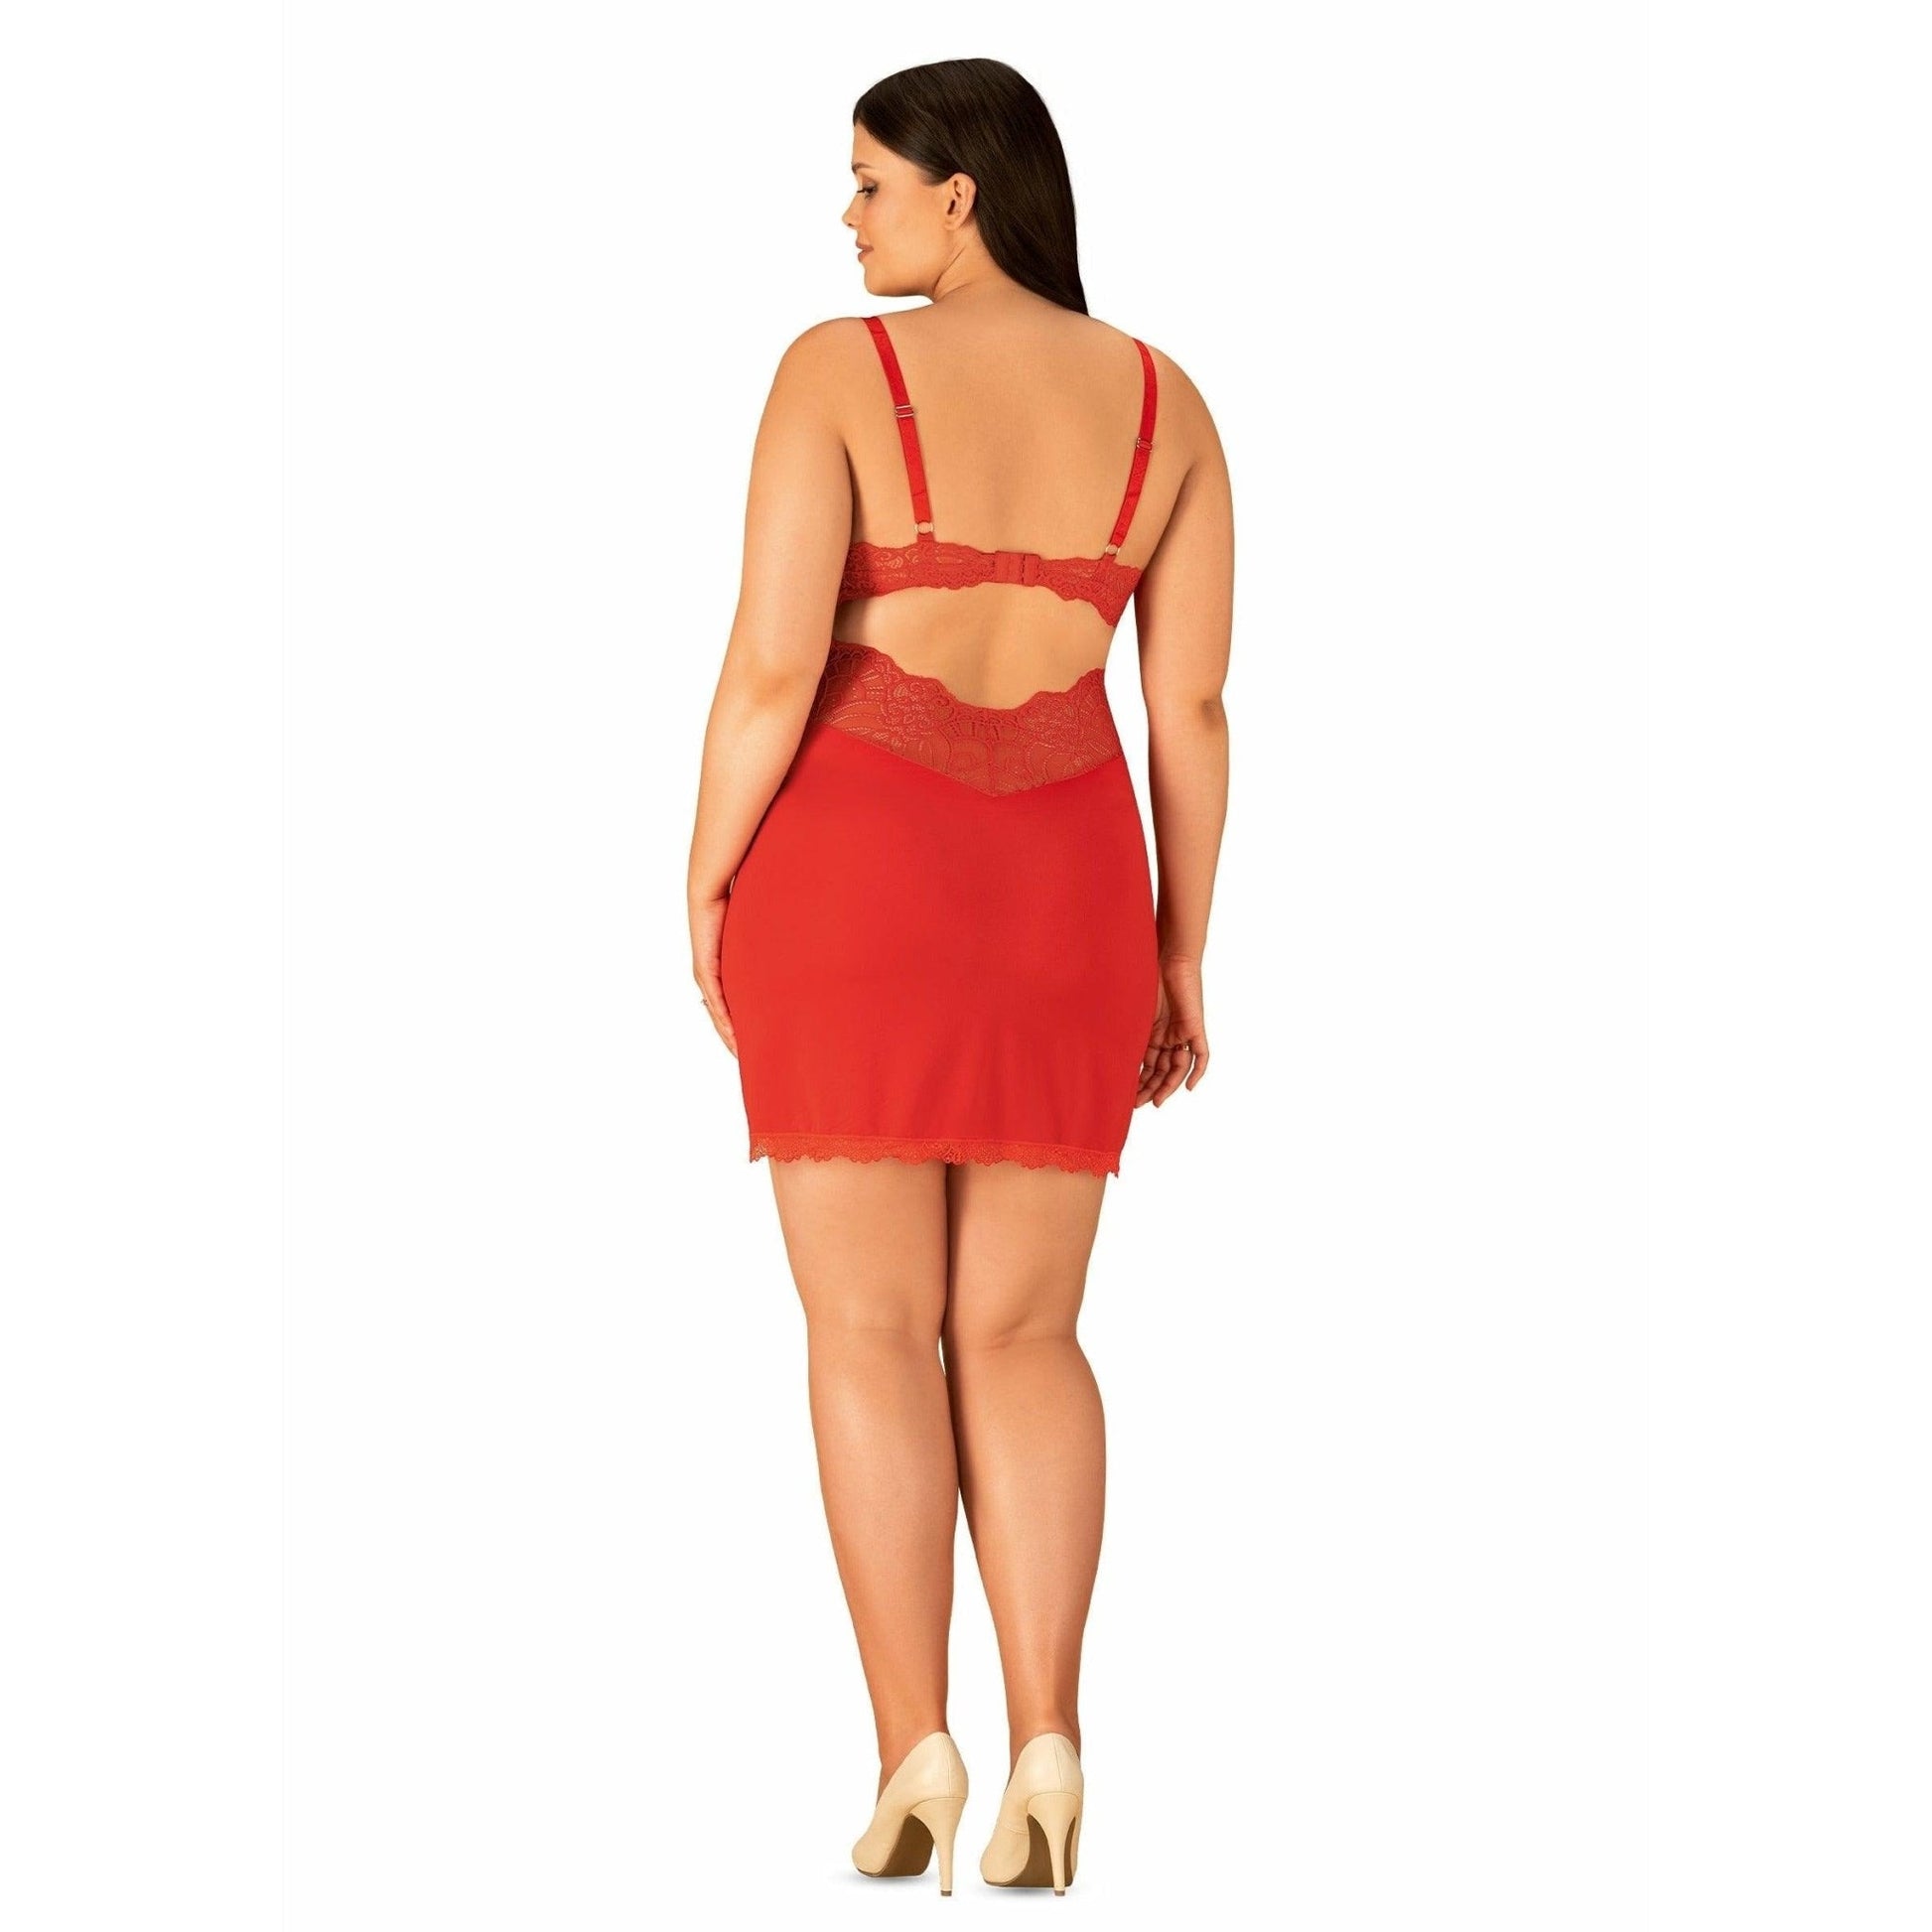 Plus Size Red Chemise & Thong - Obsessive Lingerie